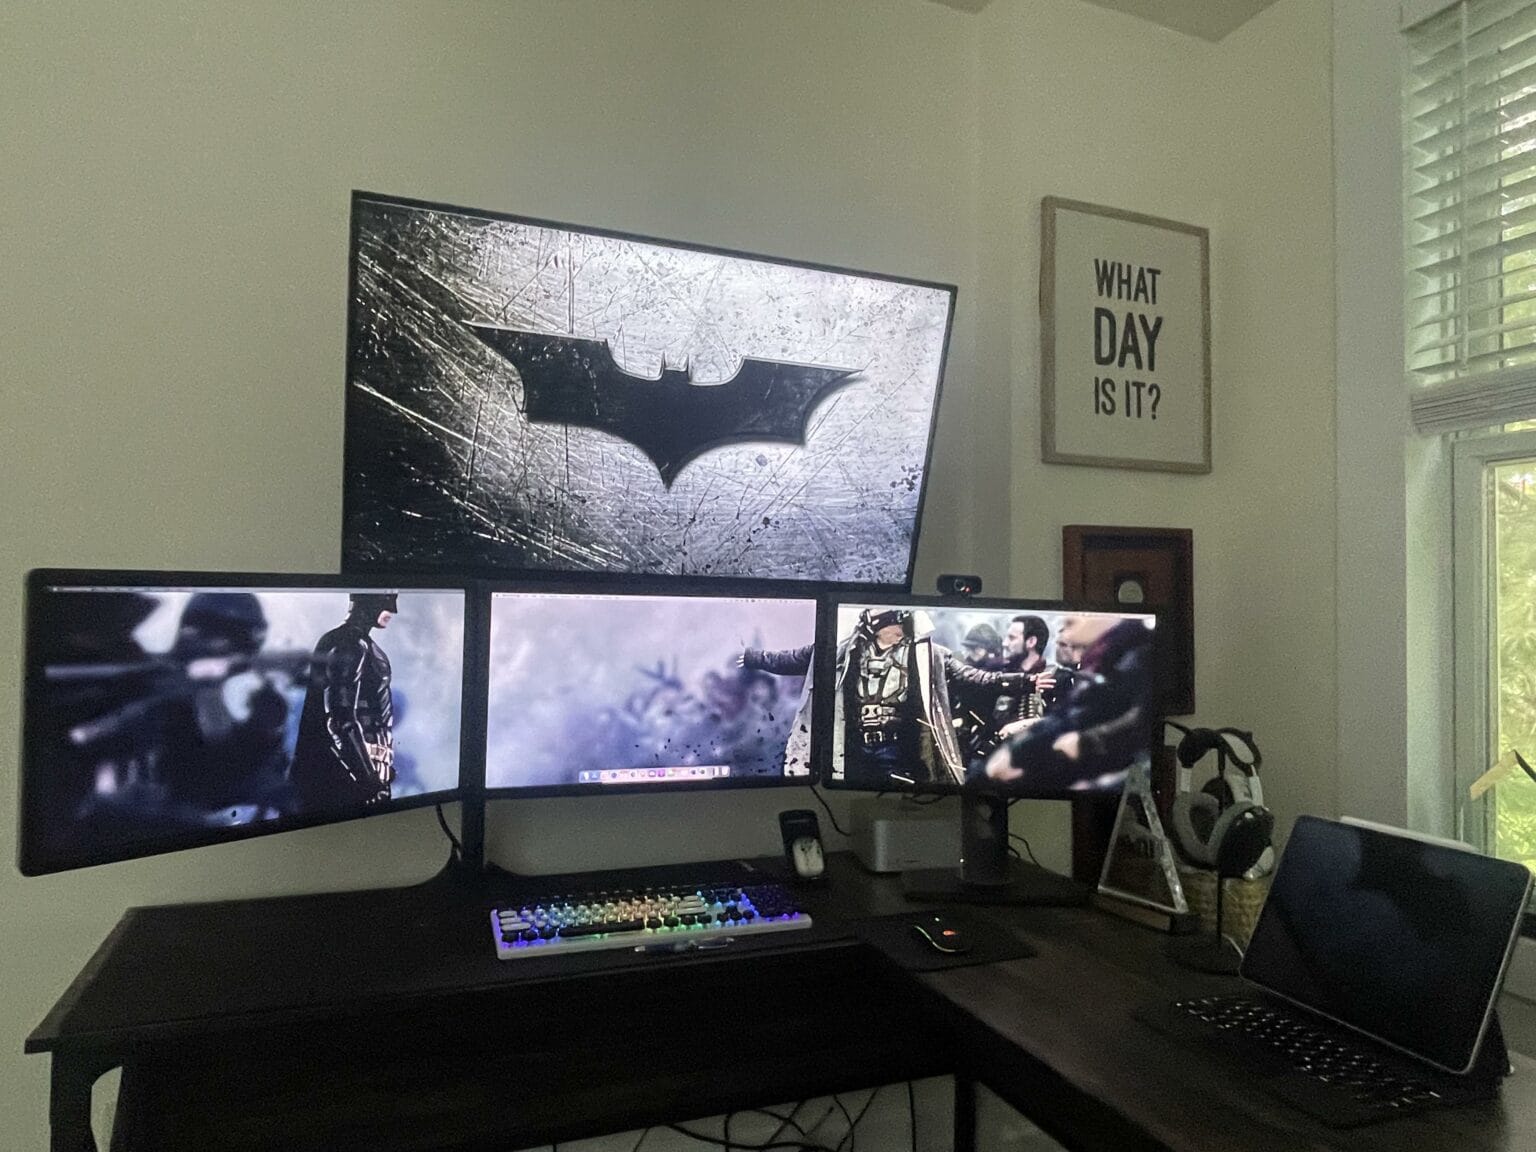 The Bat-Signal is displayed on a giant screen atop three other monitors in a Batman-themed computer setup.